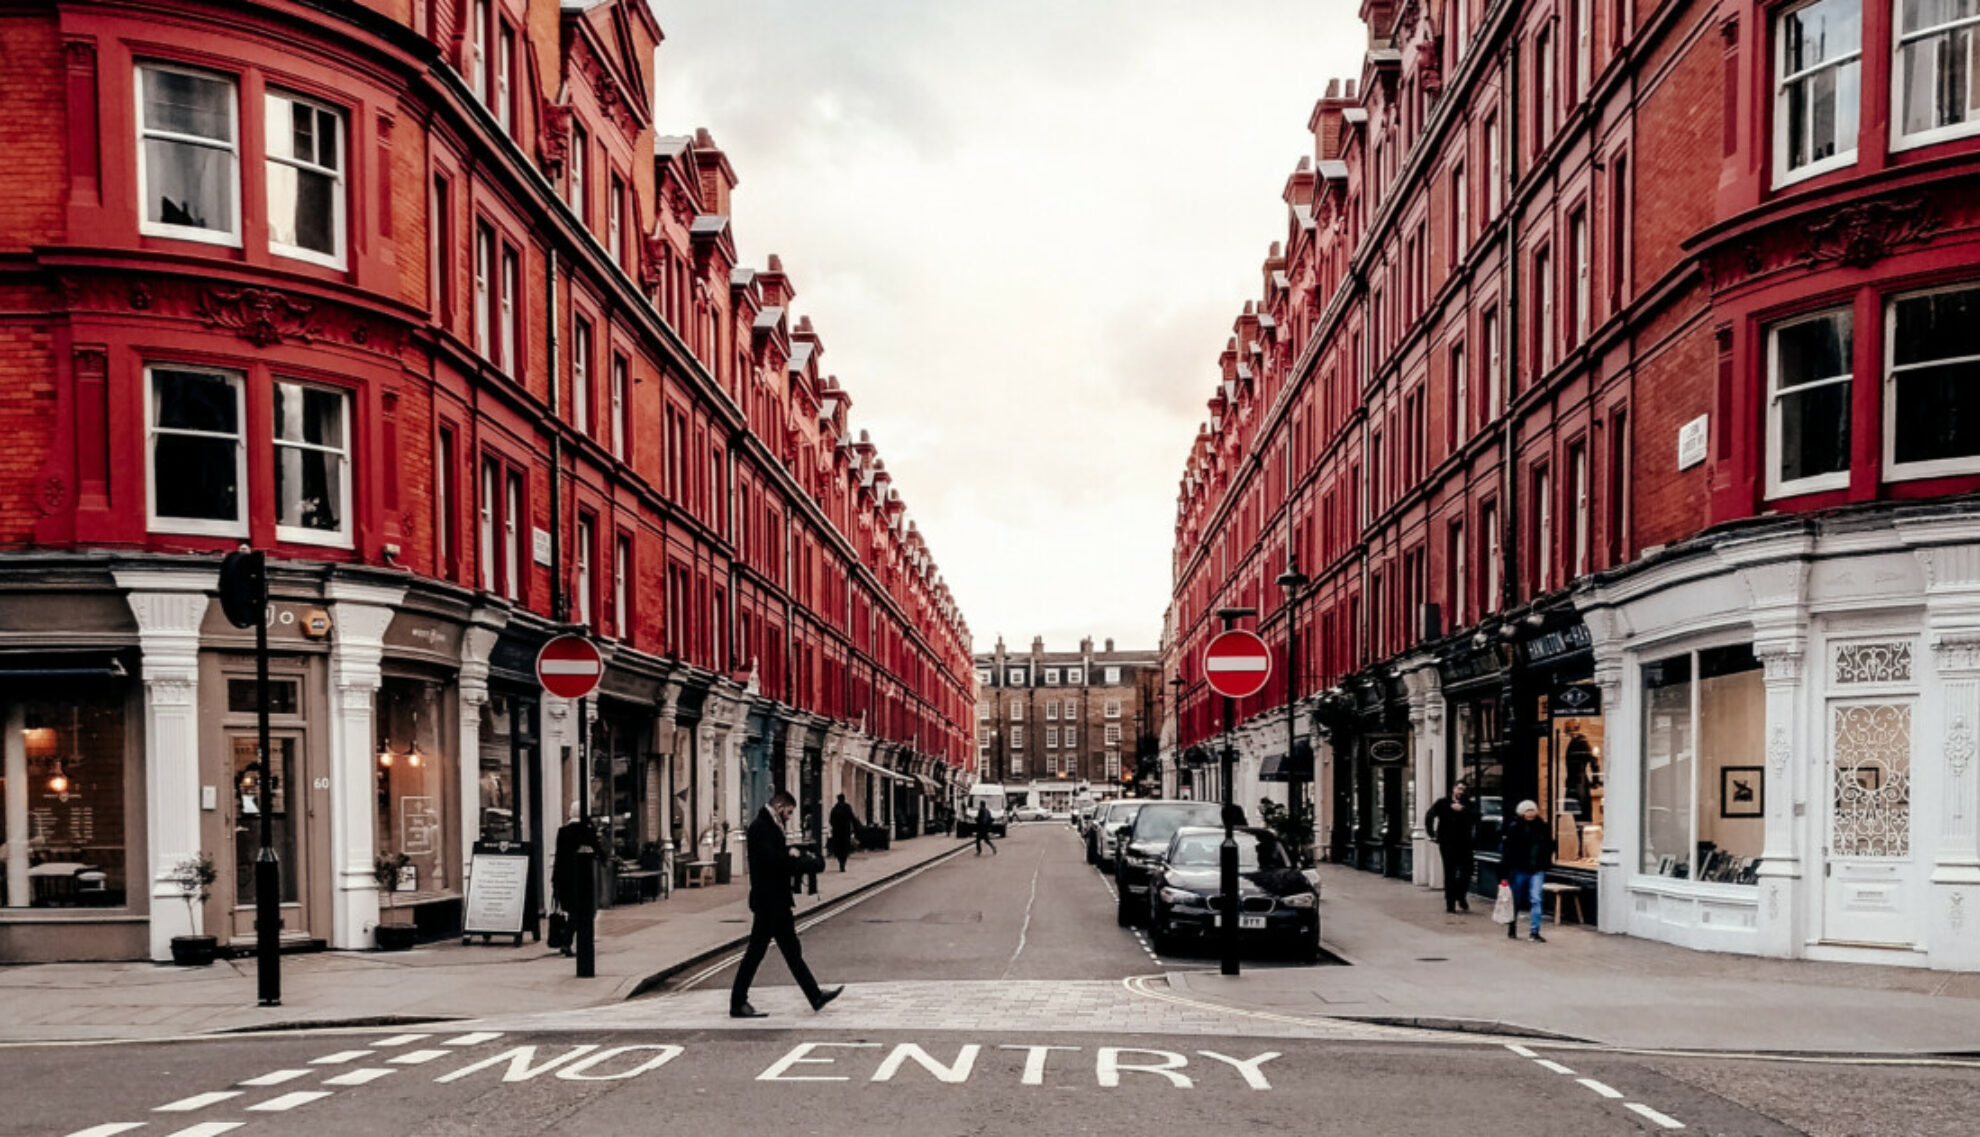 A London street with red buildings